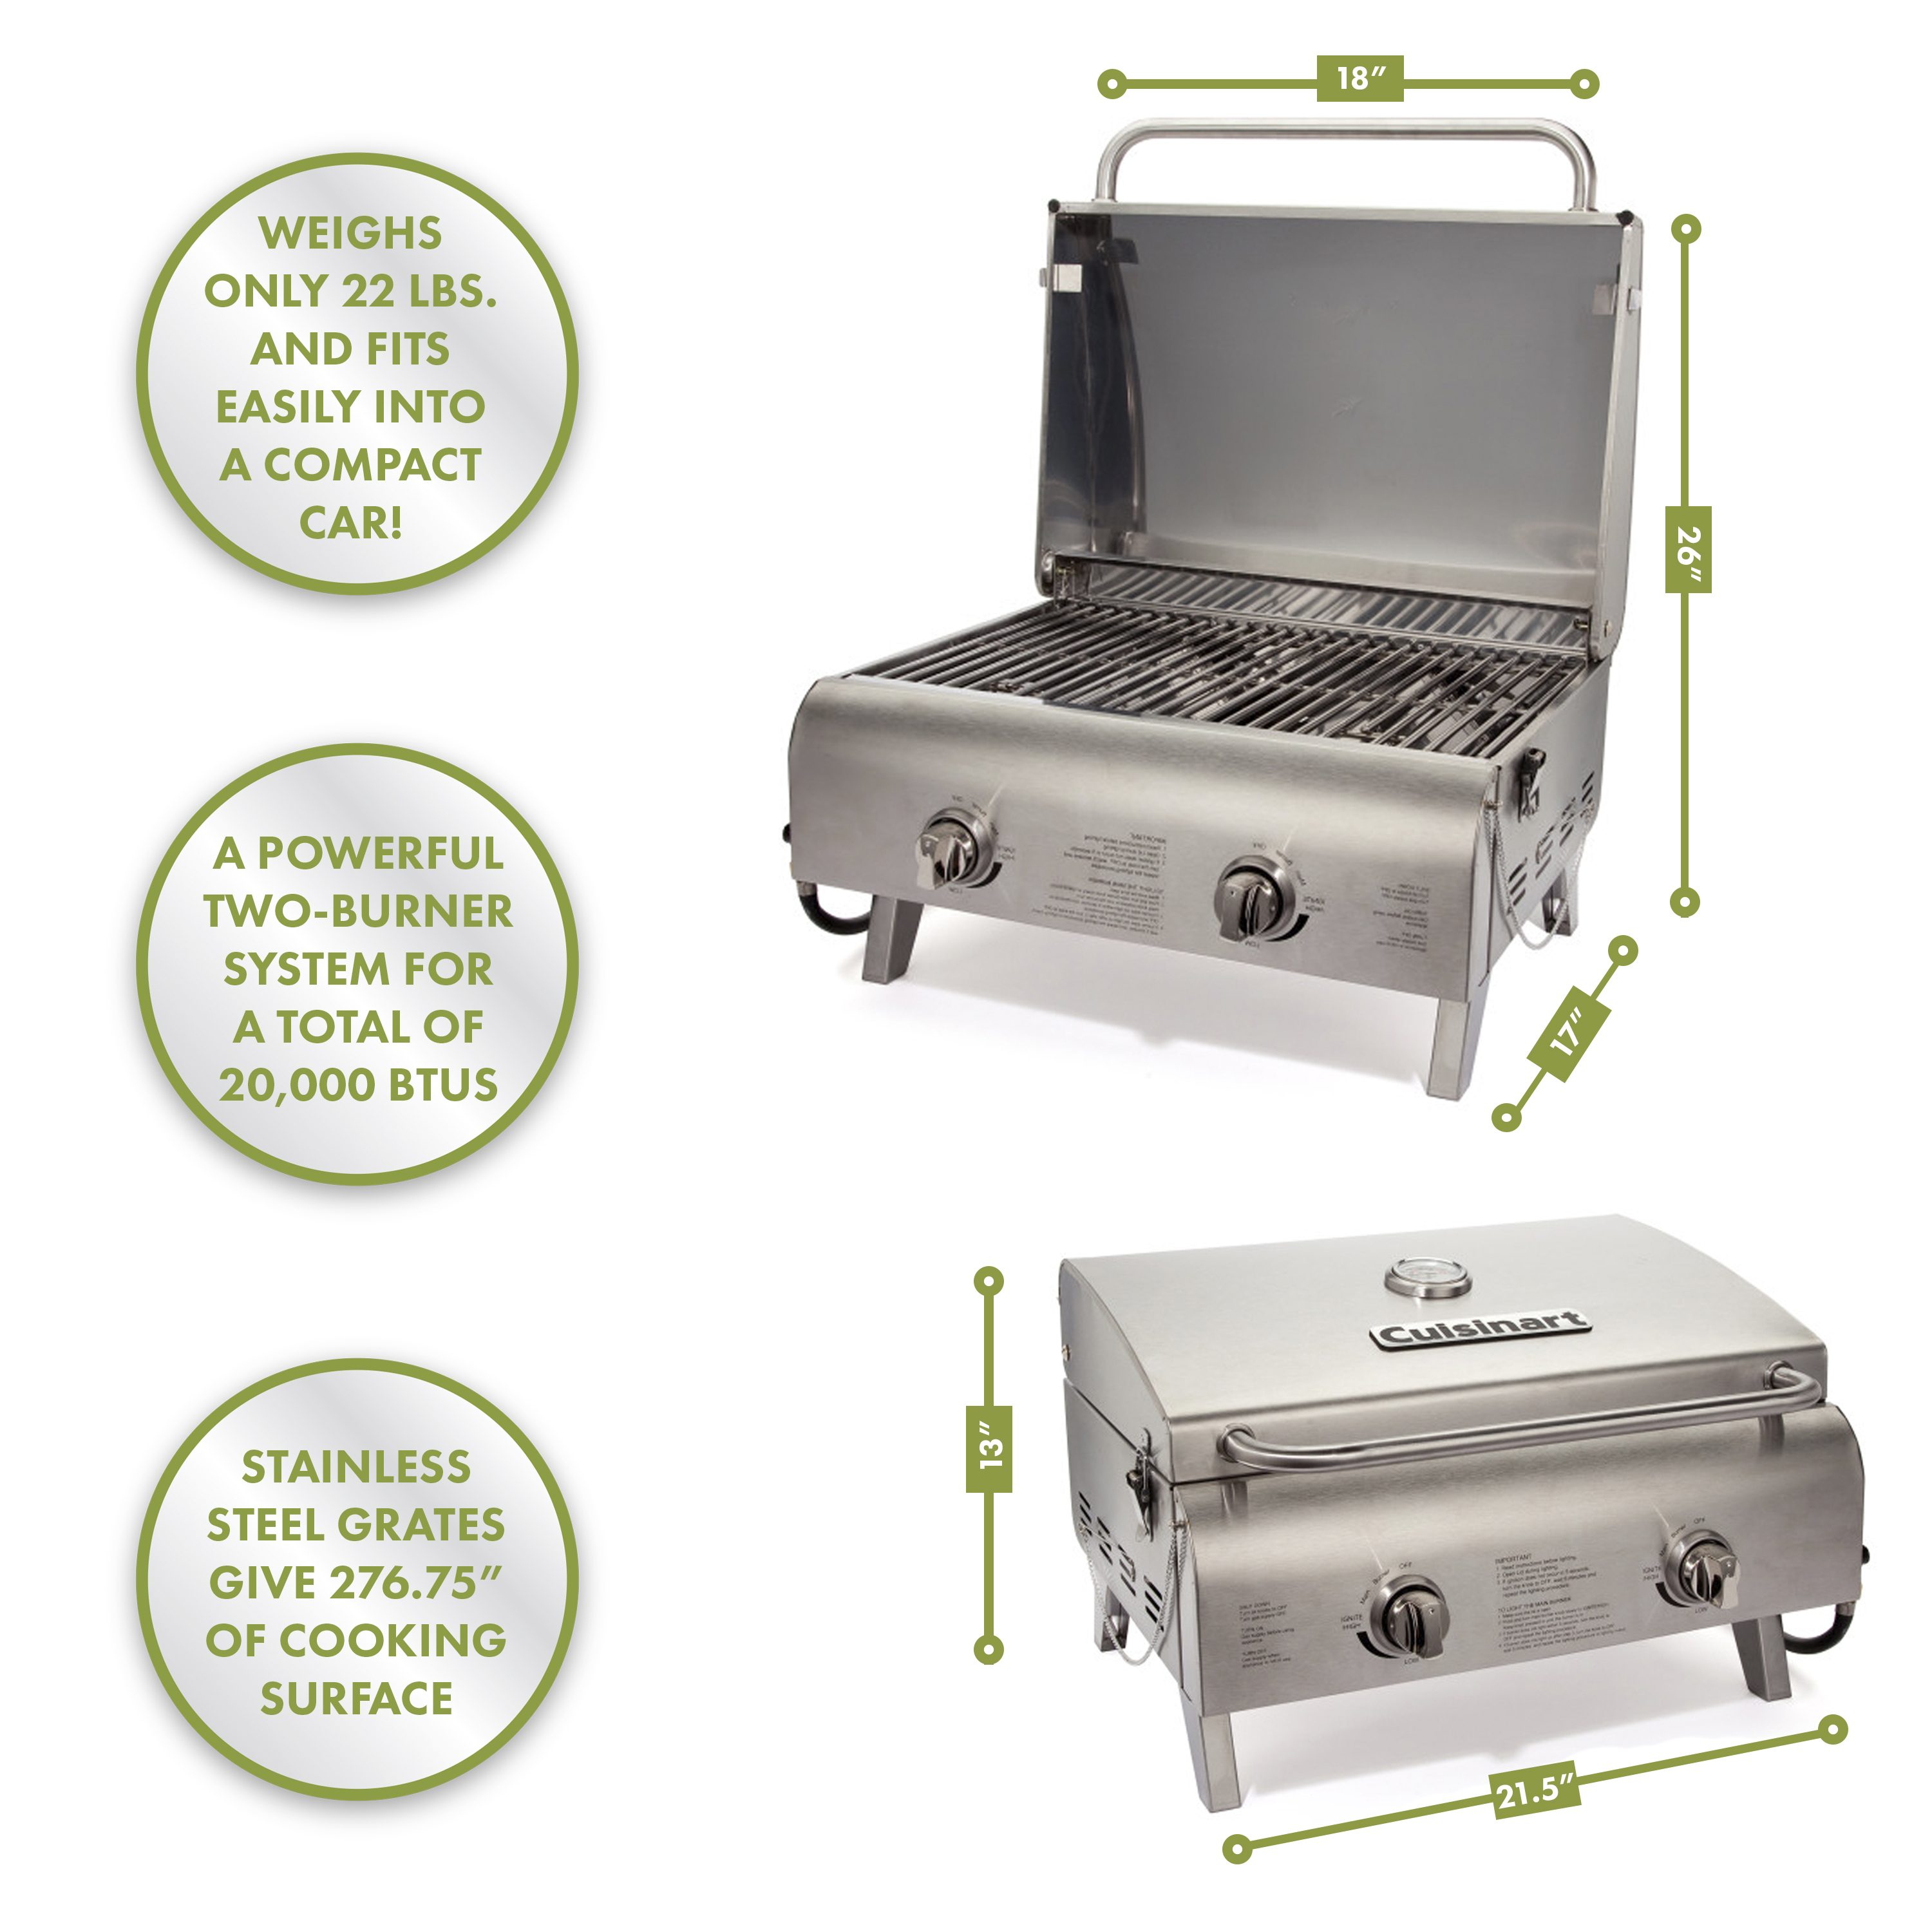 Cuisinart CGG-306 Chef's Style Stainless 2 Burner Tabletop Gas Grill, Silver - image 5 of 17